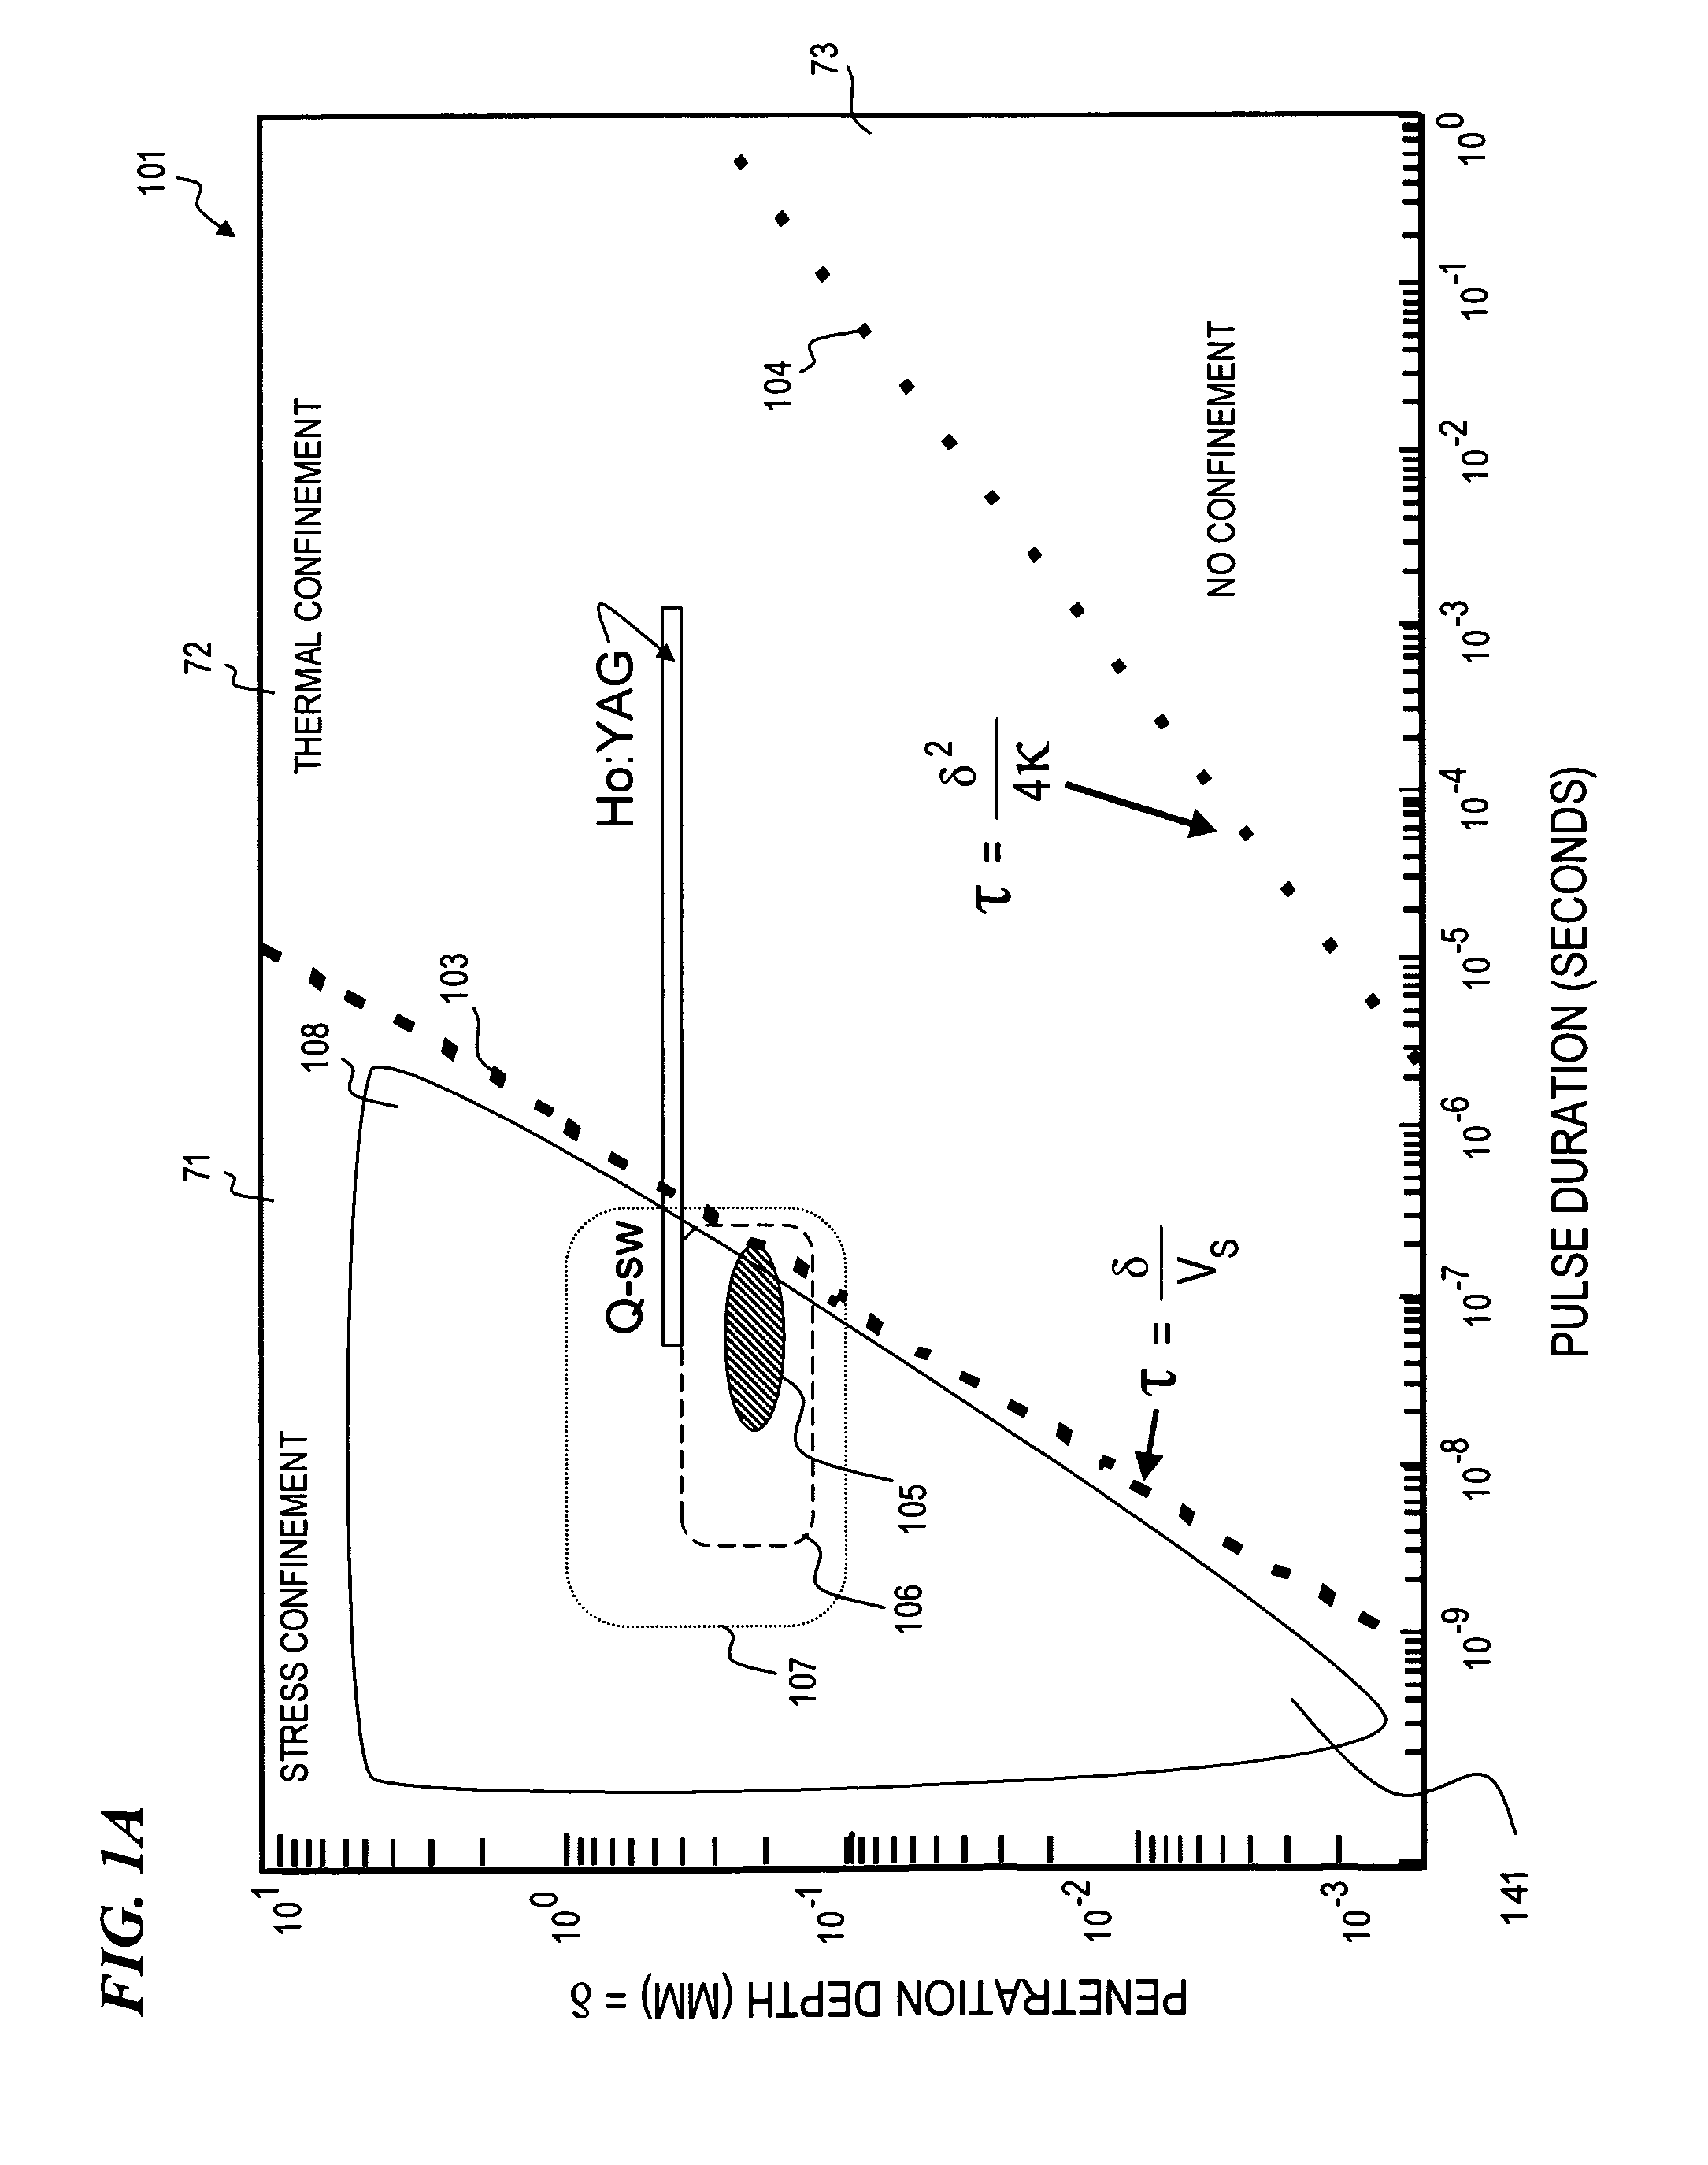 Method and multiple-mode device for high-power short-pulse laser ablation and CW cauterization of bodily tissues